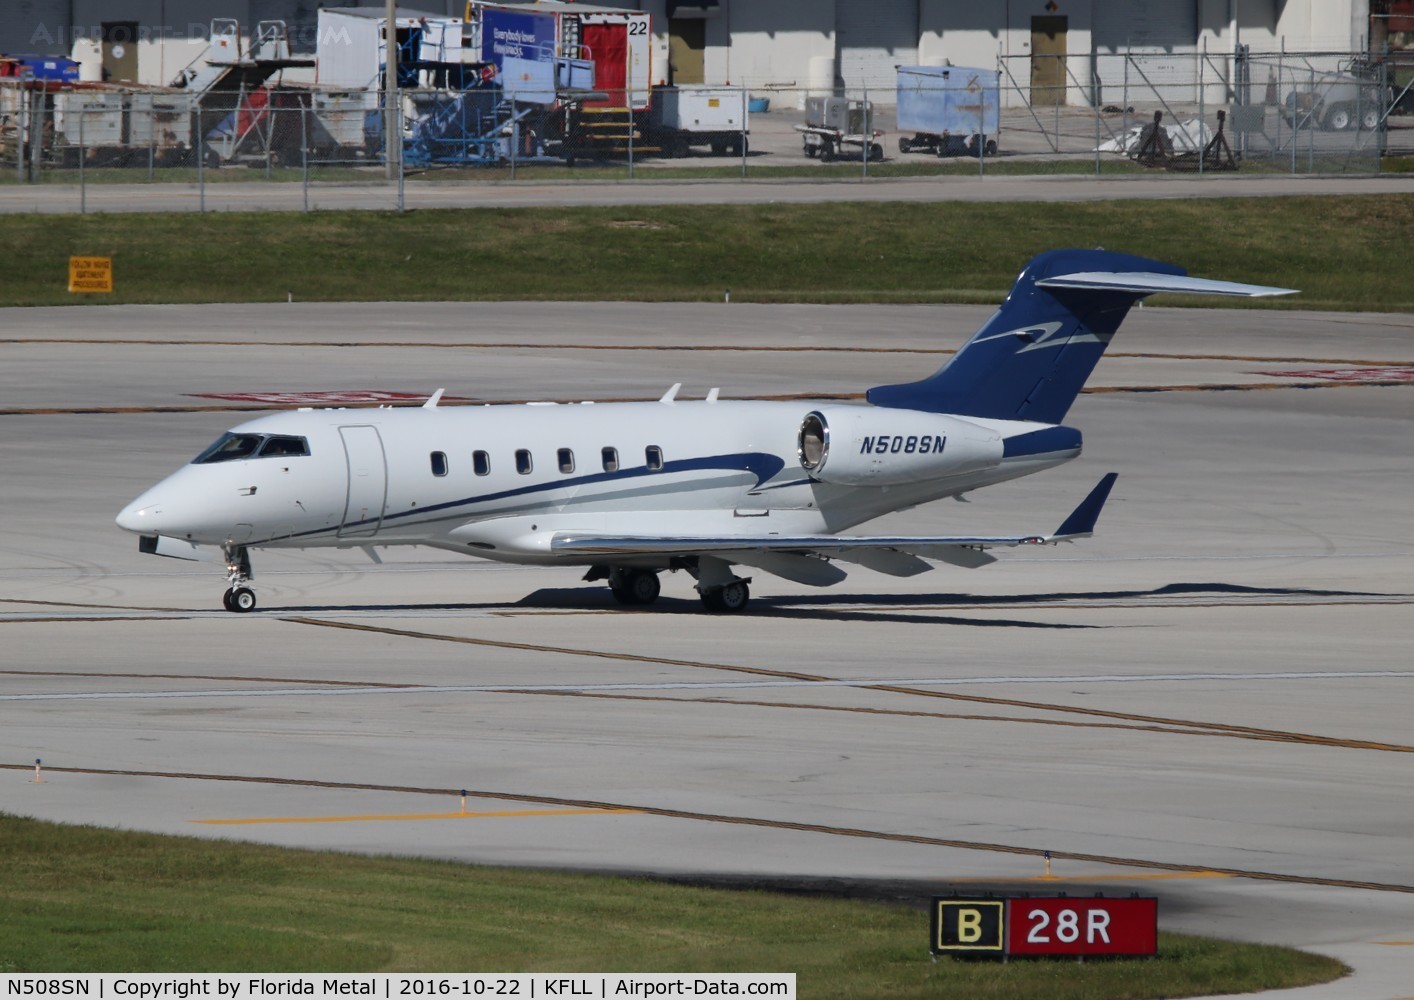 N508SN, 2009 Bombardier Challenger 300 (BD-100-1A10) C/N 20269, Challenger 300 zx